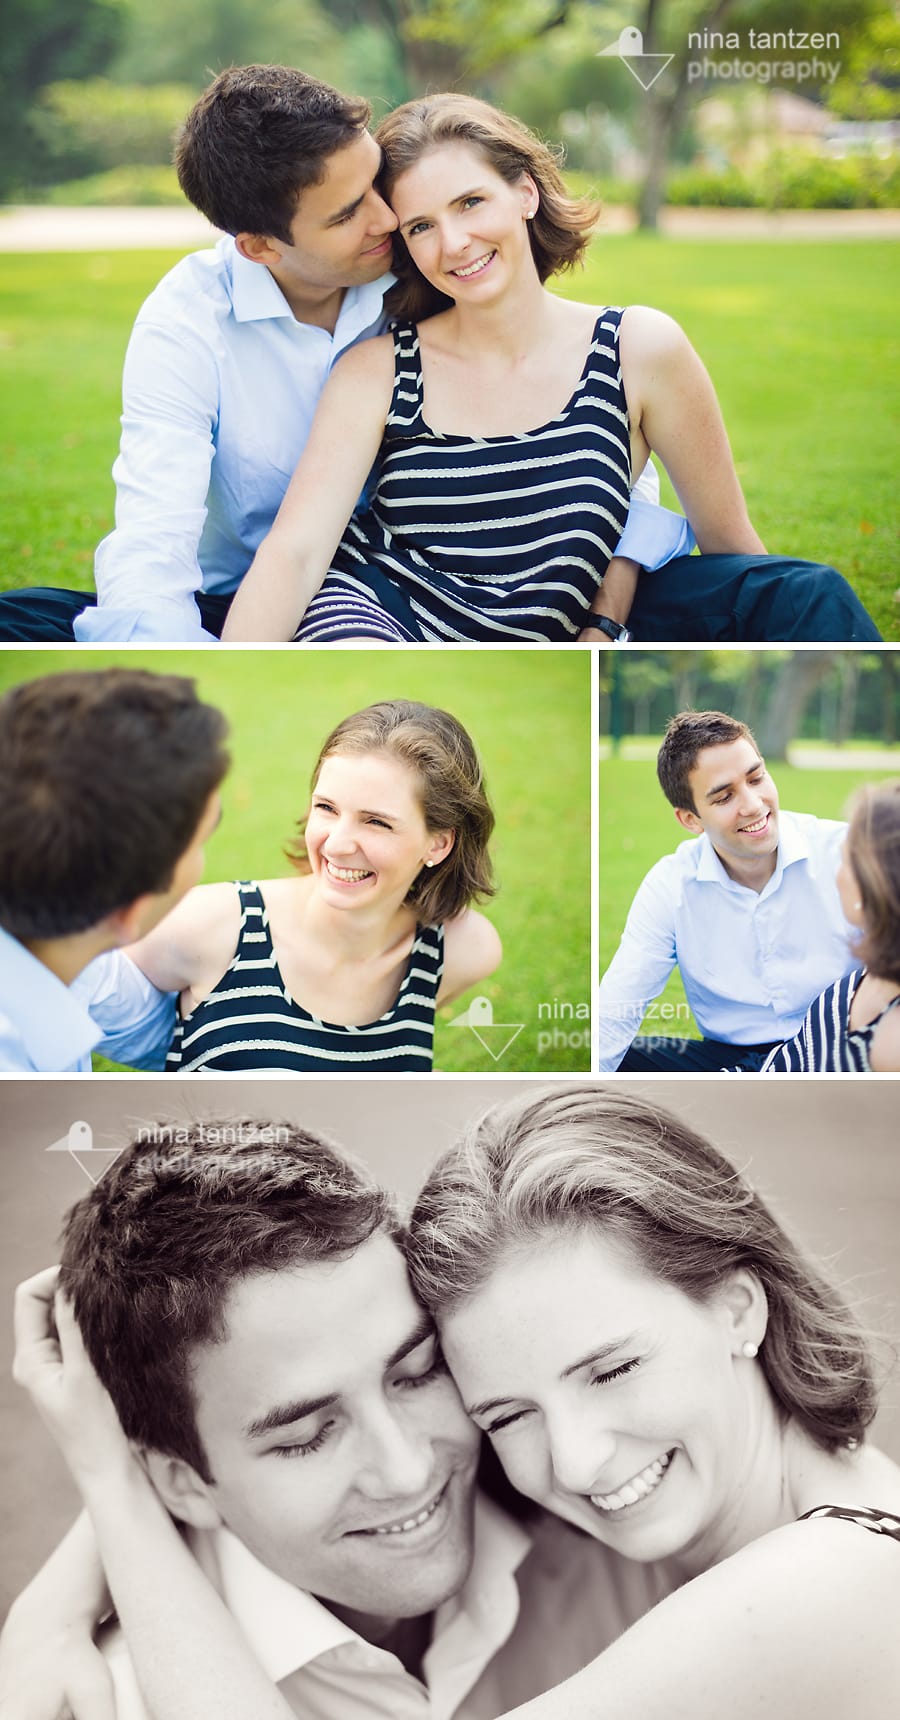 beloved couples photography in singapore